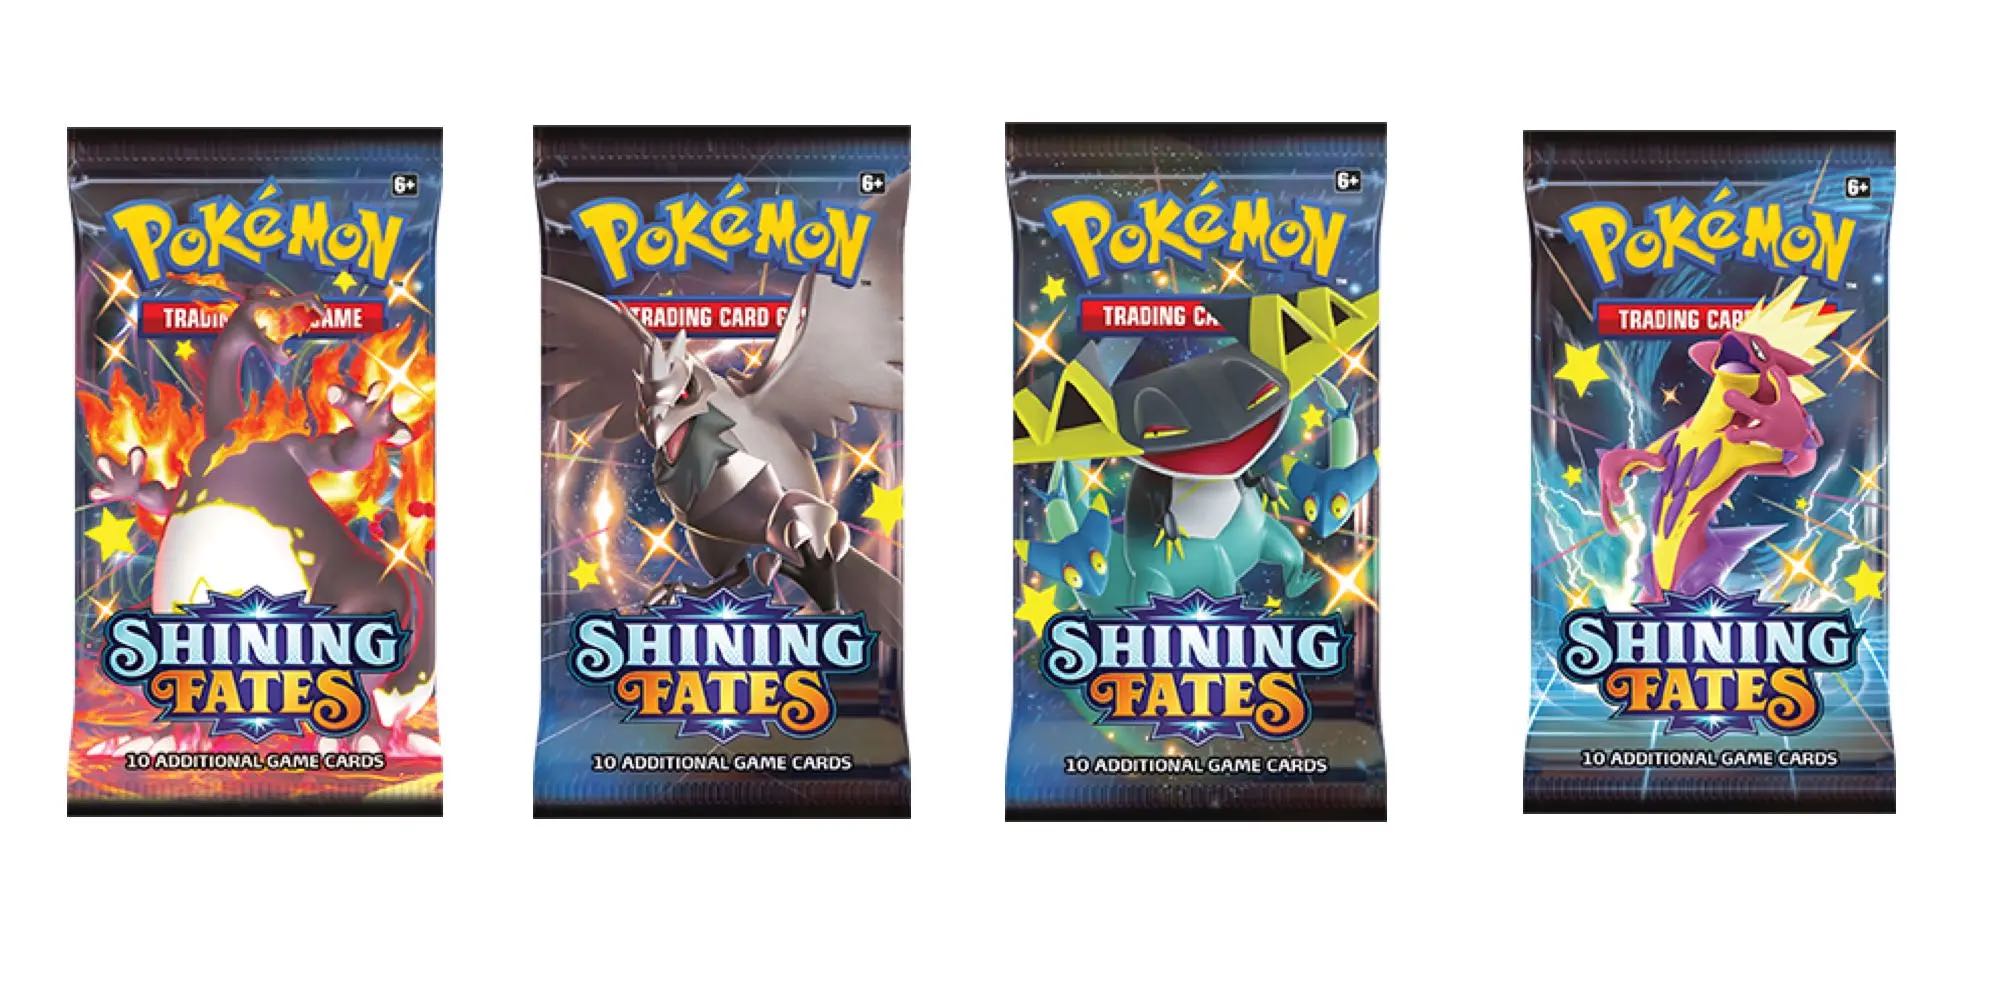 1x Pokemon Shining Fates Booster Pack Shiny BRAND NEW FACTORY SEALED 1 PACK 